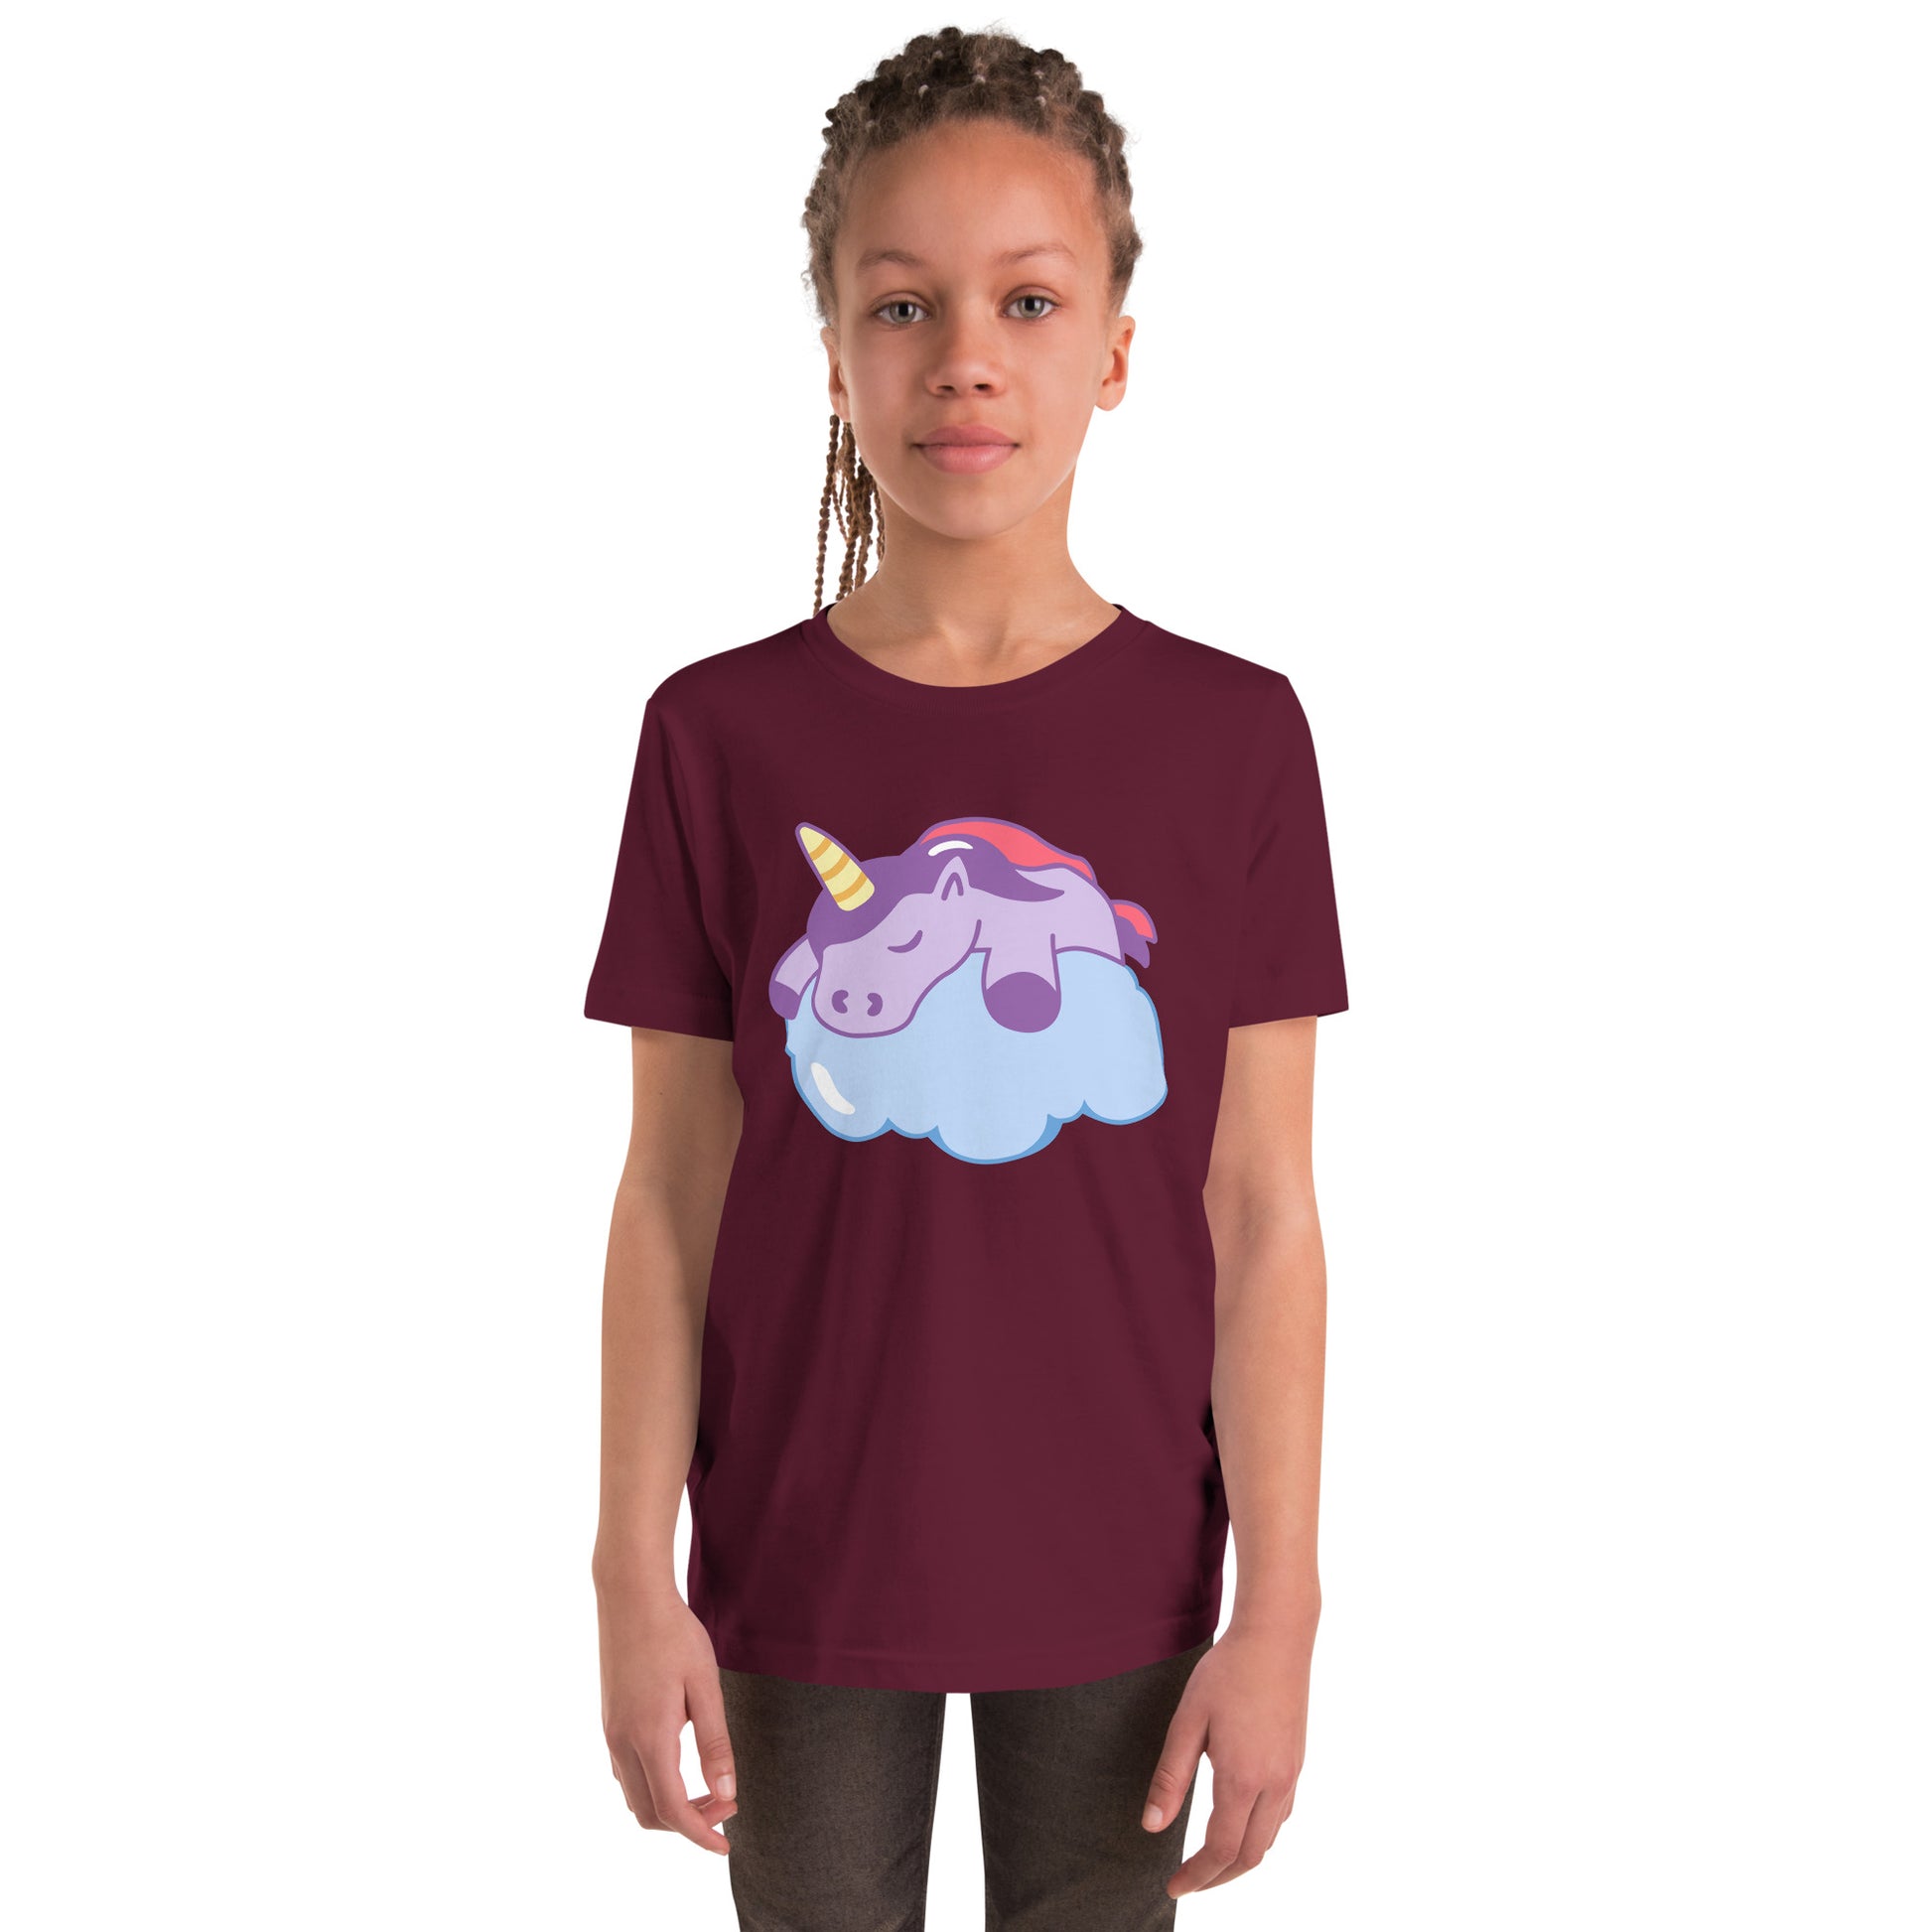 Youth with a maroon T-shirt with a print of a sleeping unicorn on a cloud